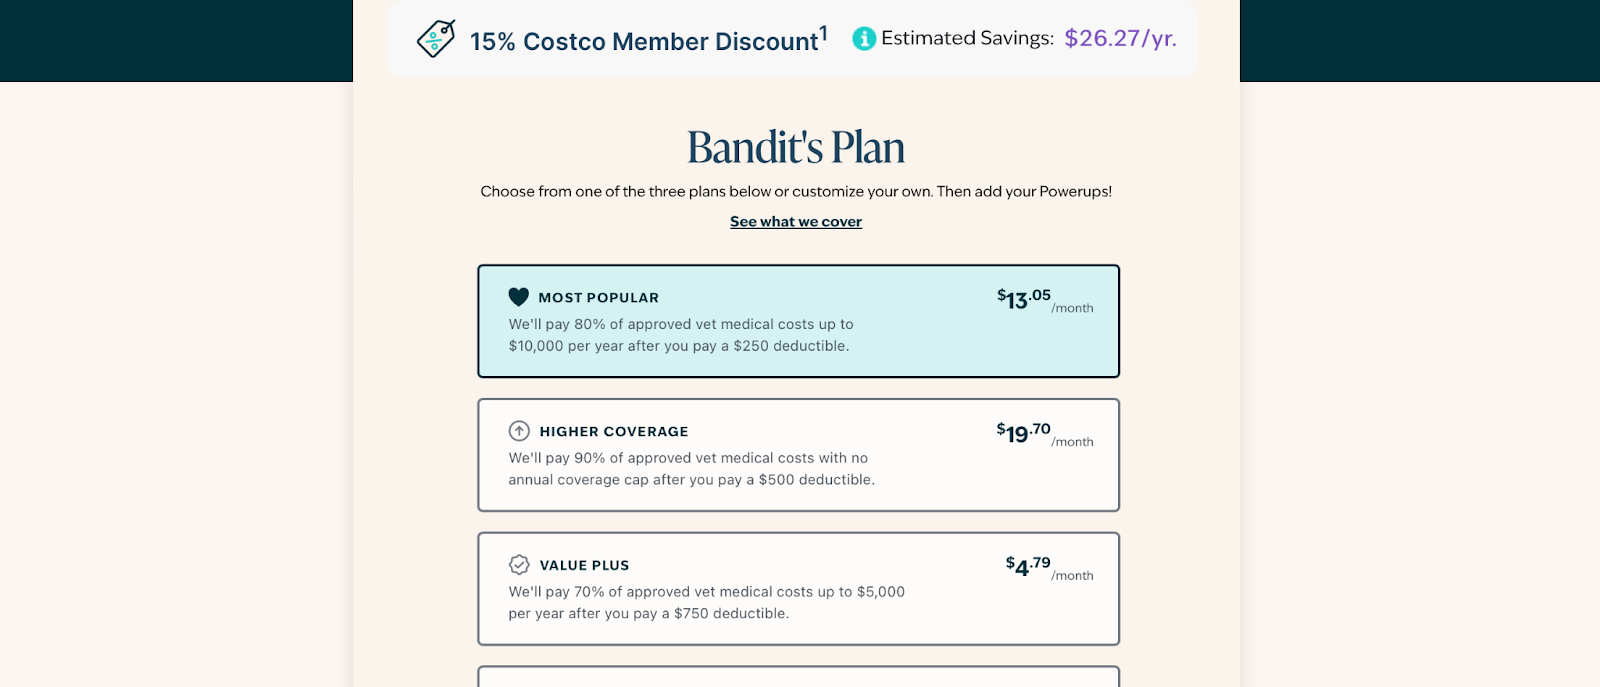 Quote for Bandit's plan with 15% Costco member discount